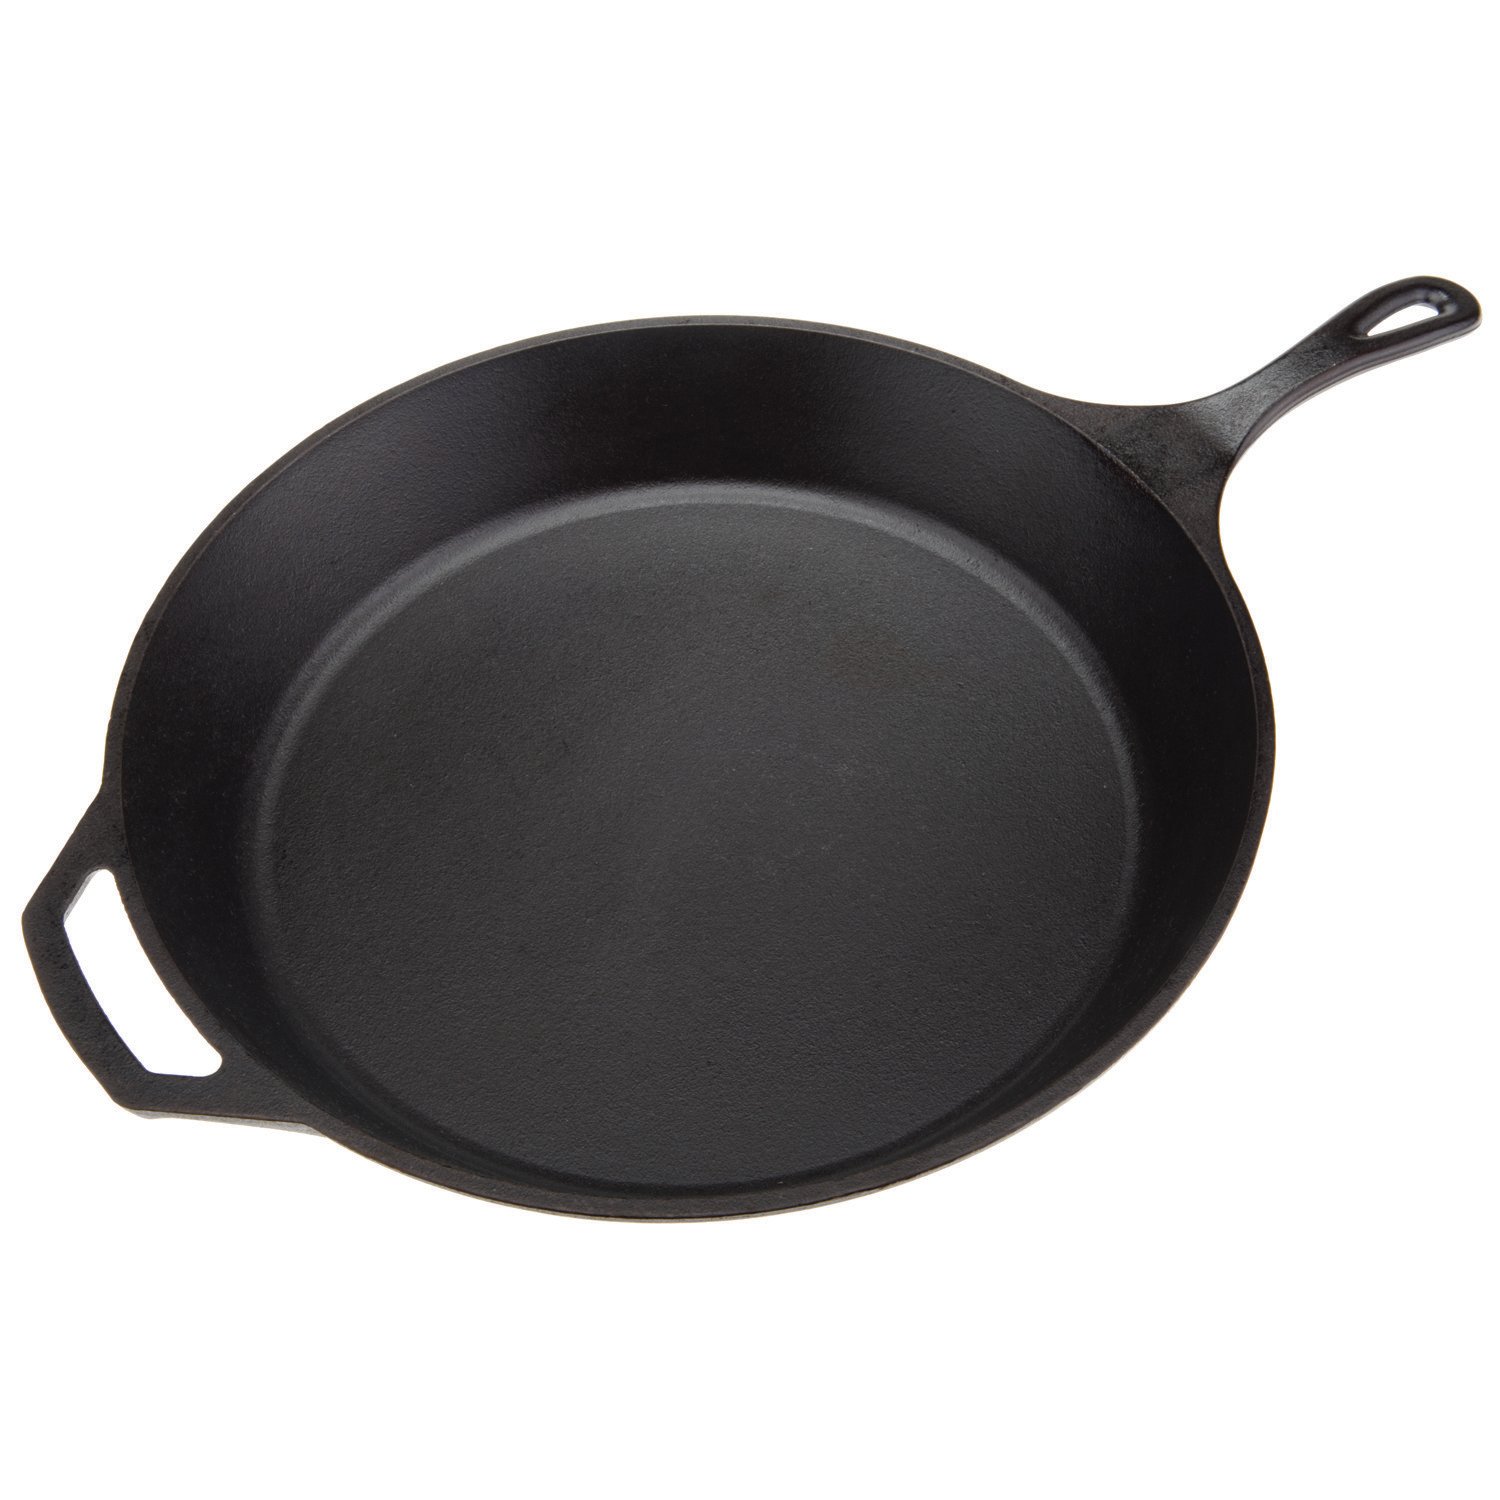 Lodge Cast Iron - Celebrate cooking outdoors with 15% off the